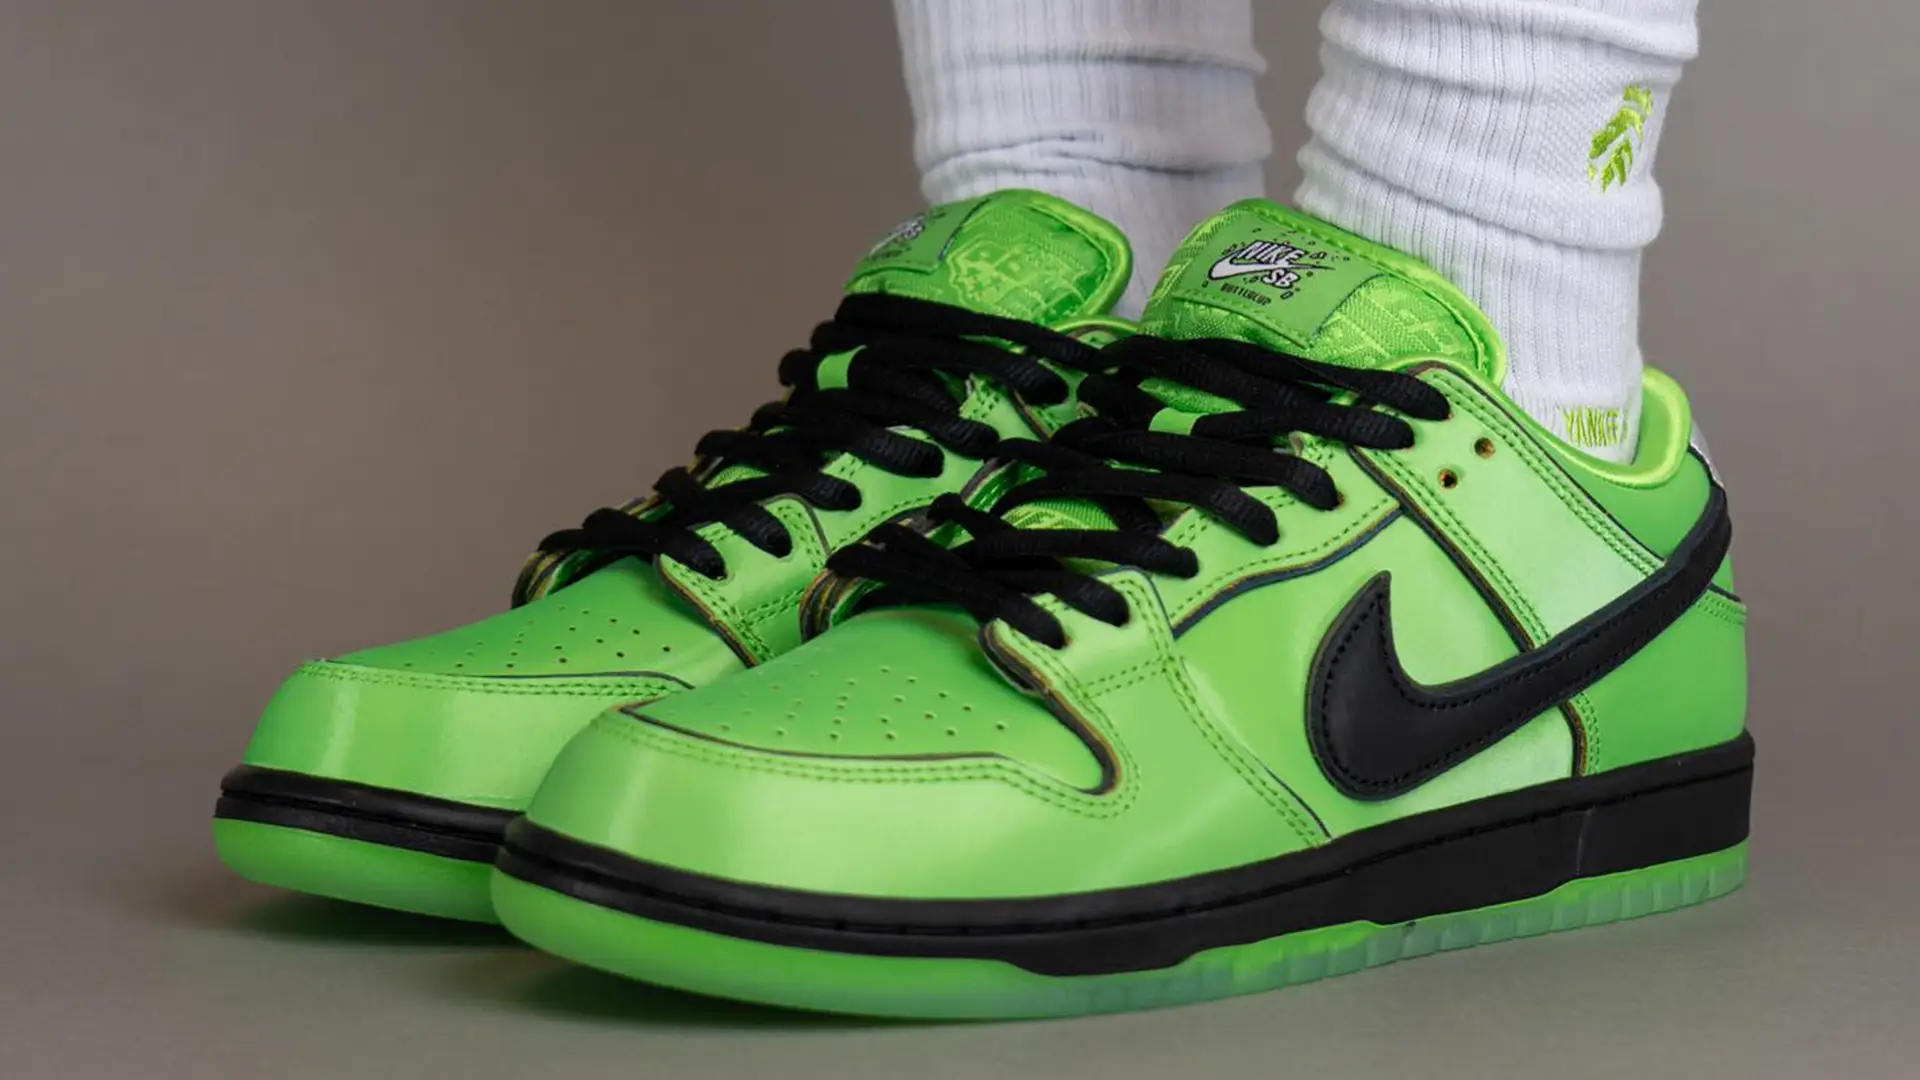 Here's An On-Foot Look At the Powerpuff Girls x Nike SB Dunk